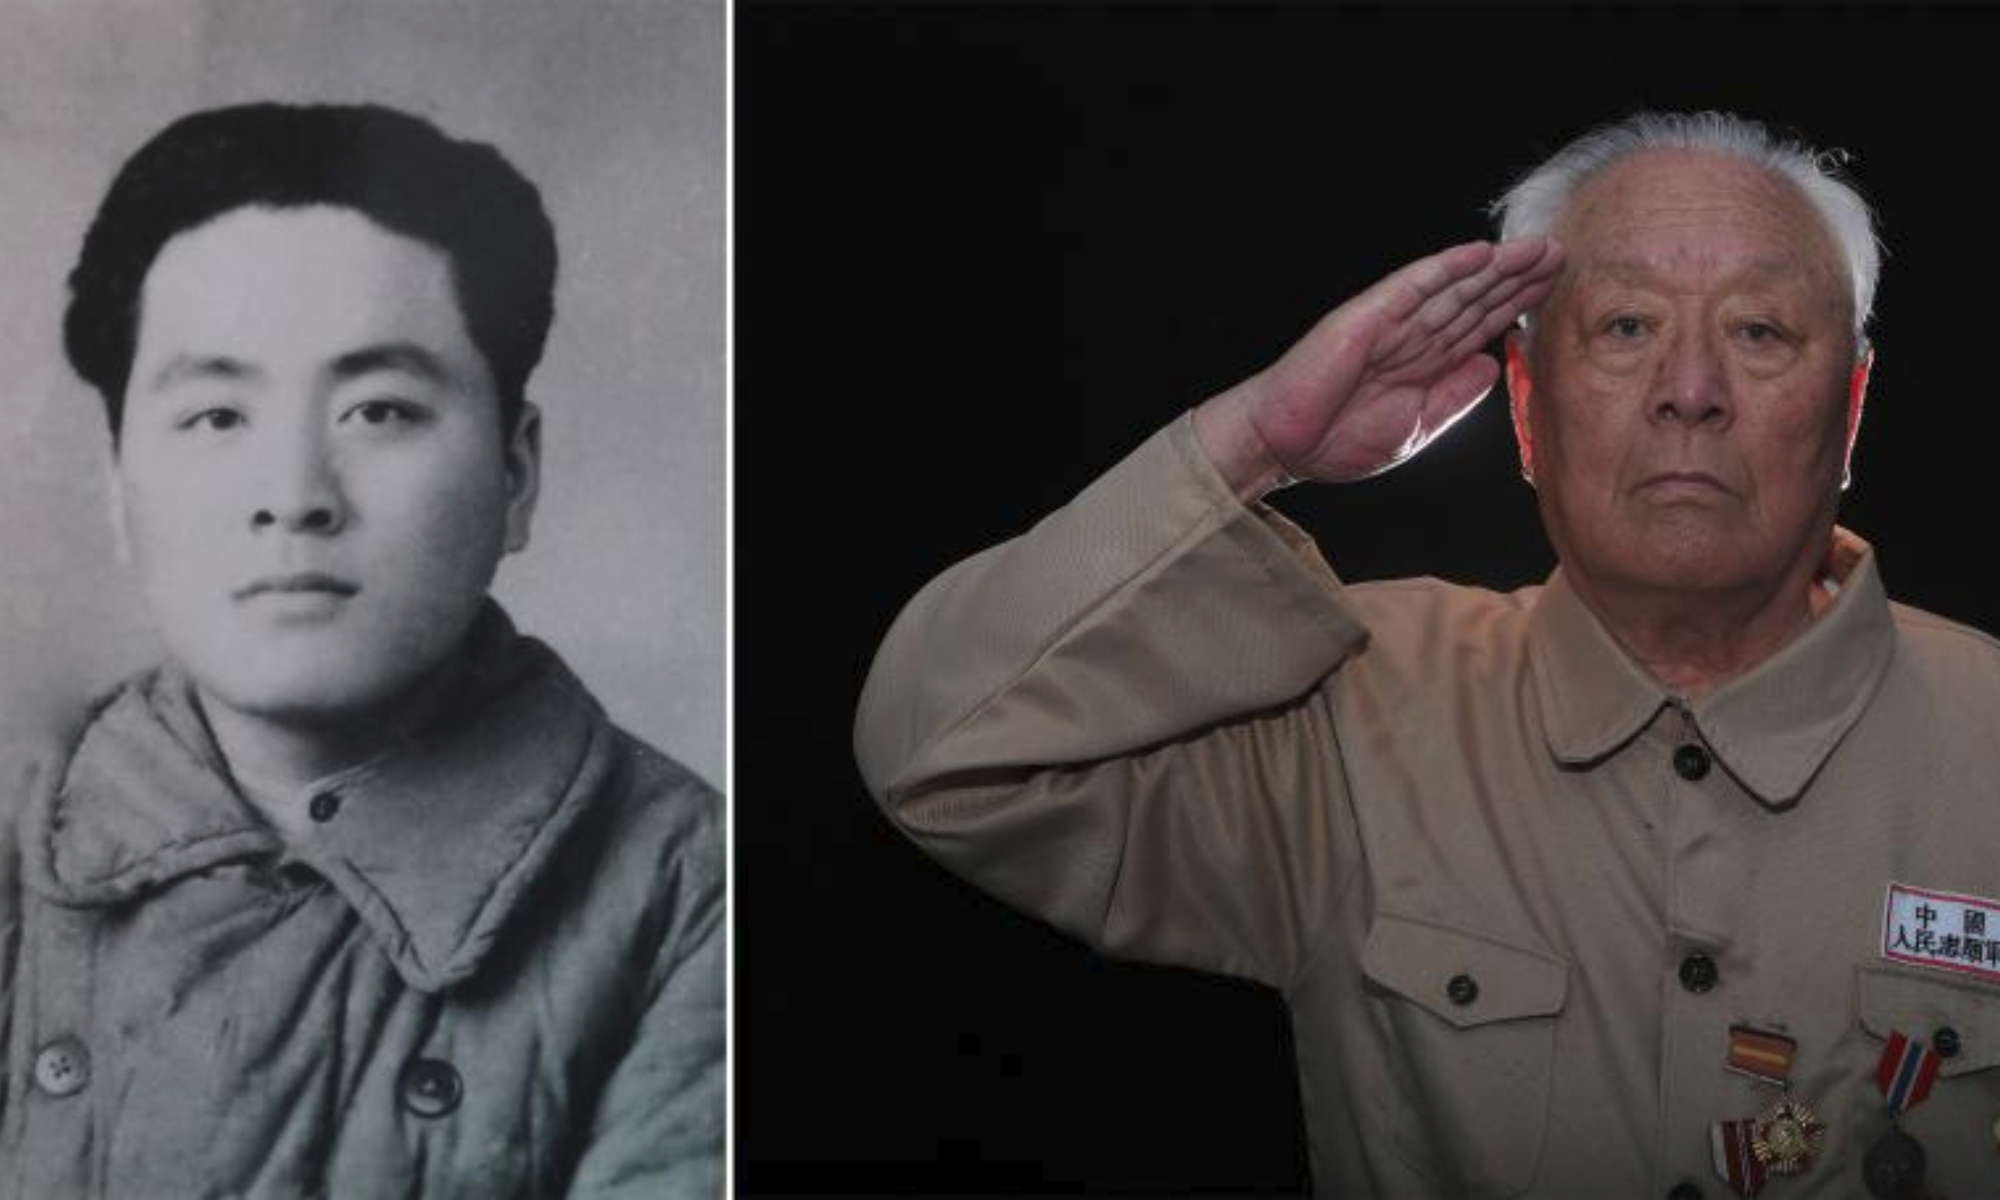 This combo photo shows the portrait of Yang Diansheng on Aug. 13, 2020. Born in 1932, Yang joined the Chinese People's Volunteers (CPV) as an automobile assistant in 1950.

Seventy-three years ago, the Chinese People's Volunteers (CPV) crossed the Yalu River and fought alongside the army of the Democratic People's Republic of Korea, eventually winning the War to Resist U.S. Aggression and Aid Korea in 1953.

Thursday marked the 70th anniversary of the victory of the War.

Photographers from Xinhua took portrait photos of some CPV veterans. (Xinhua/Yang Qing)